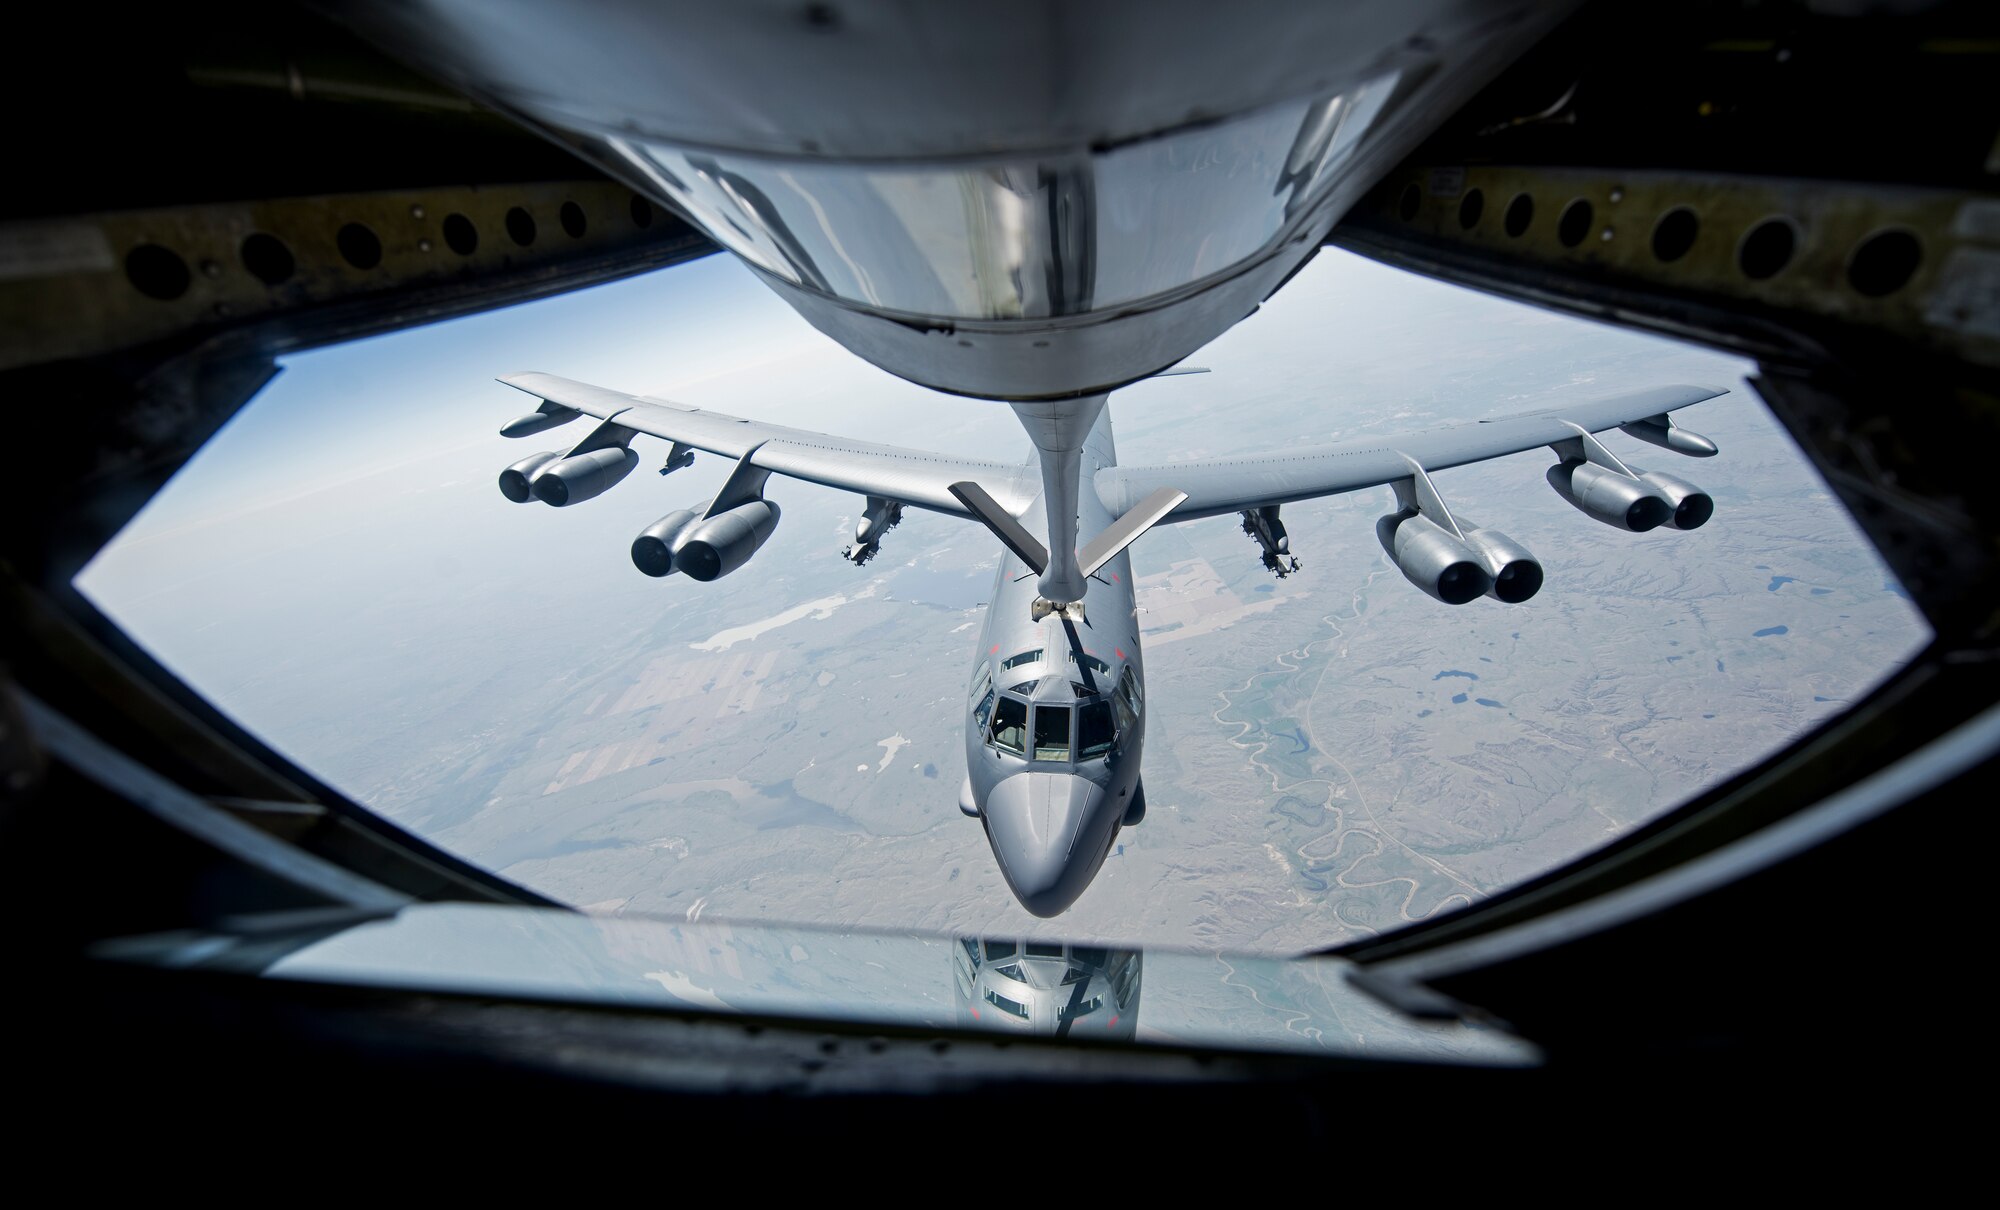 A KC-135 Stratotanker from the 92nd Air Refueling Wing at Fairchild Air Force Base, Wash. refuels B-52 Stratofortress. The refueling operation took place during Col. Ryan Samuelson, 92nd ARW/CC's final flight (U.S. Air Force photo/Senior Airman Sean Campbell)